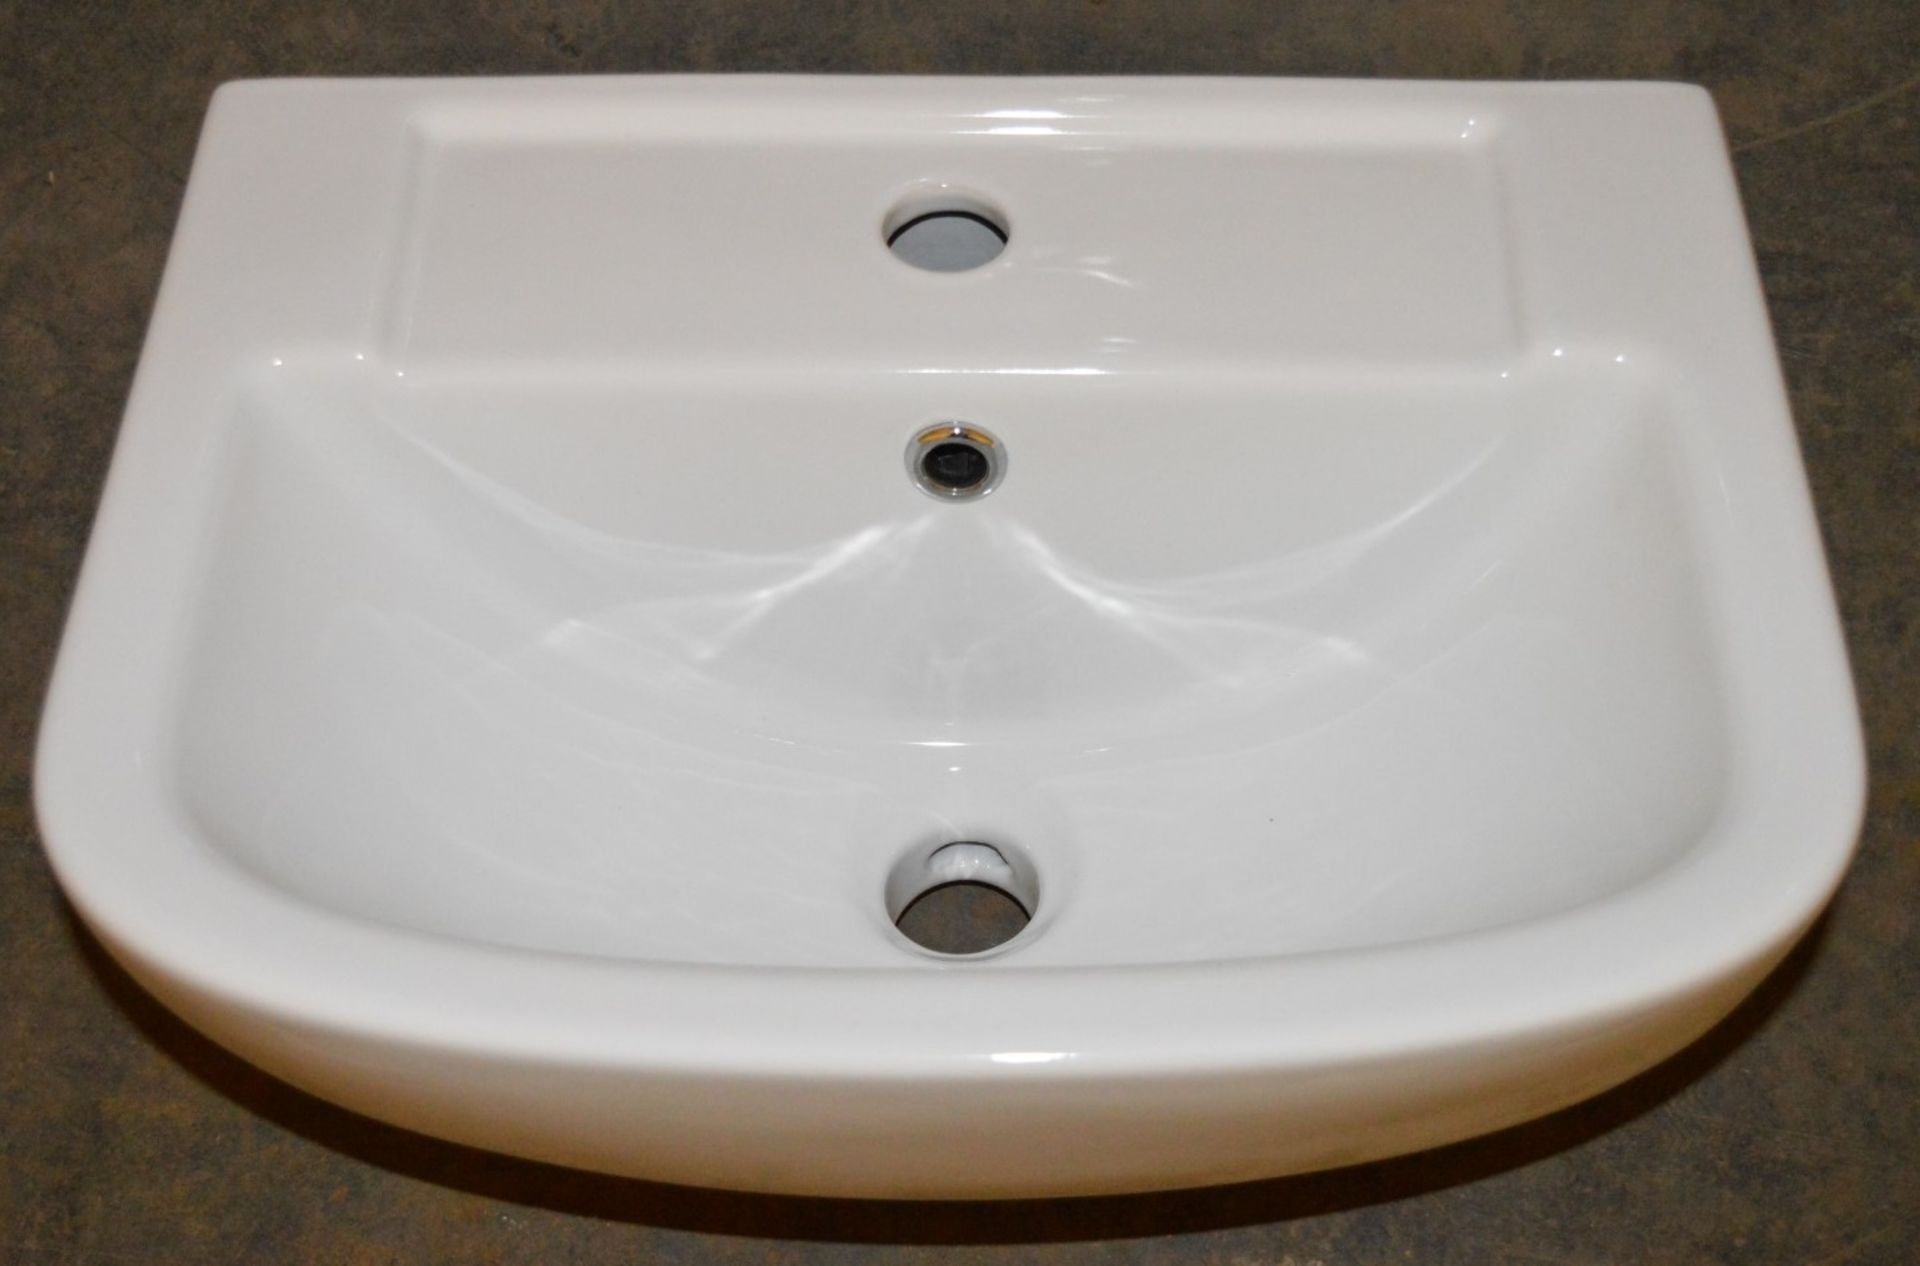 20 x Vogue Bathrooms ZERO Two Tap Hole WALL HUNG SINK BASINS - 450mm Width - Brand New Boxed Stock -